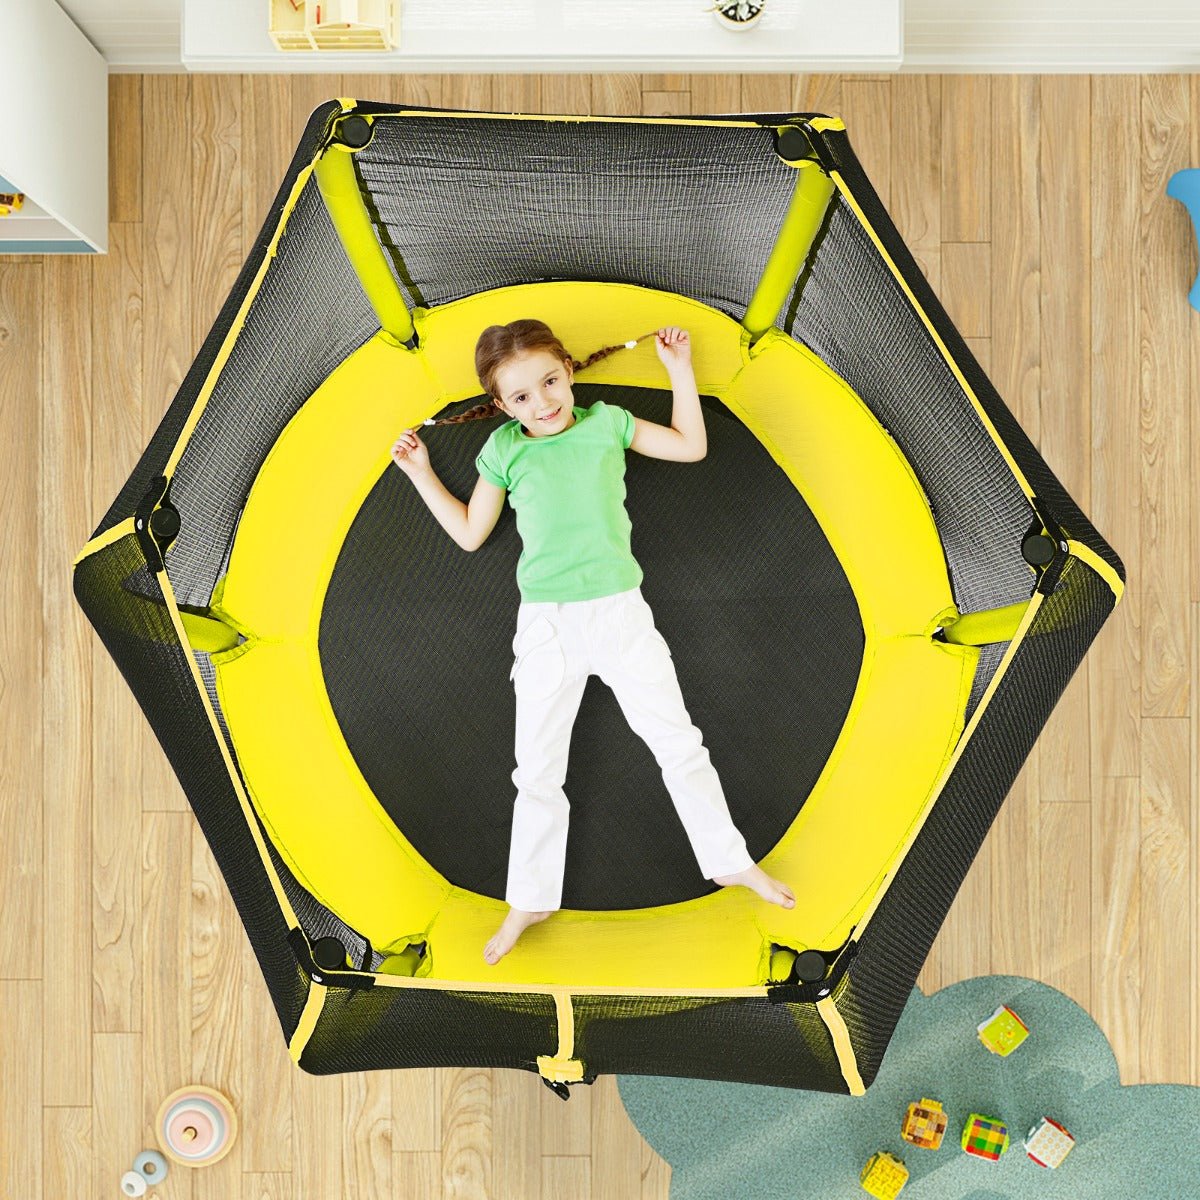 Boundless Fun: 42 Inches Trampoline with Enclosure Net and Safety Pad